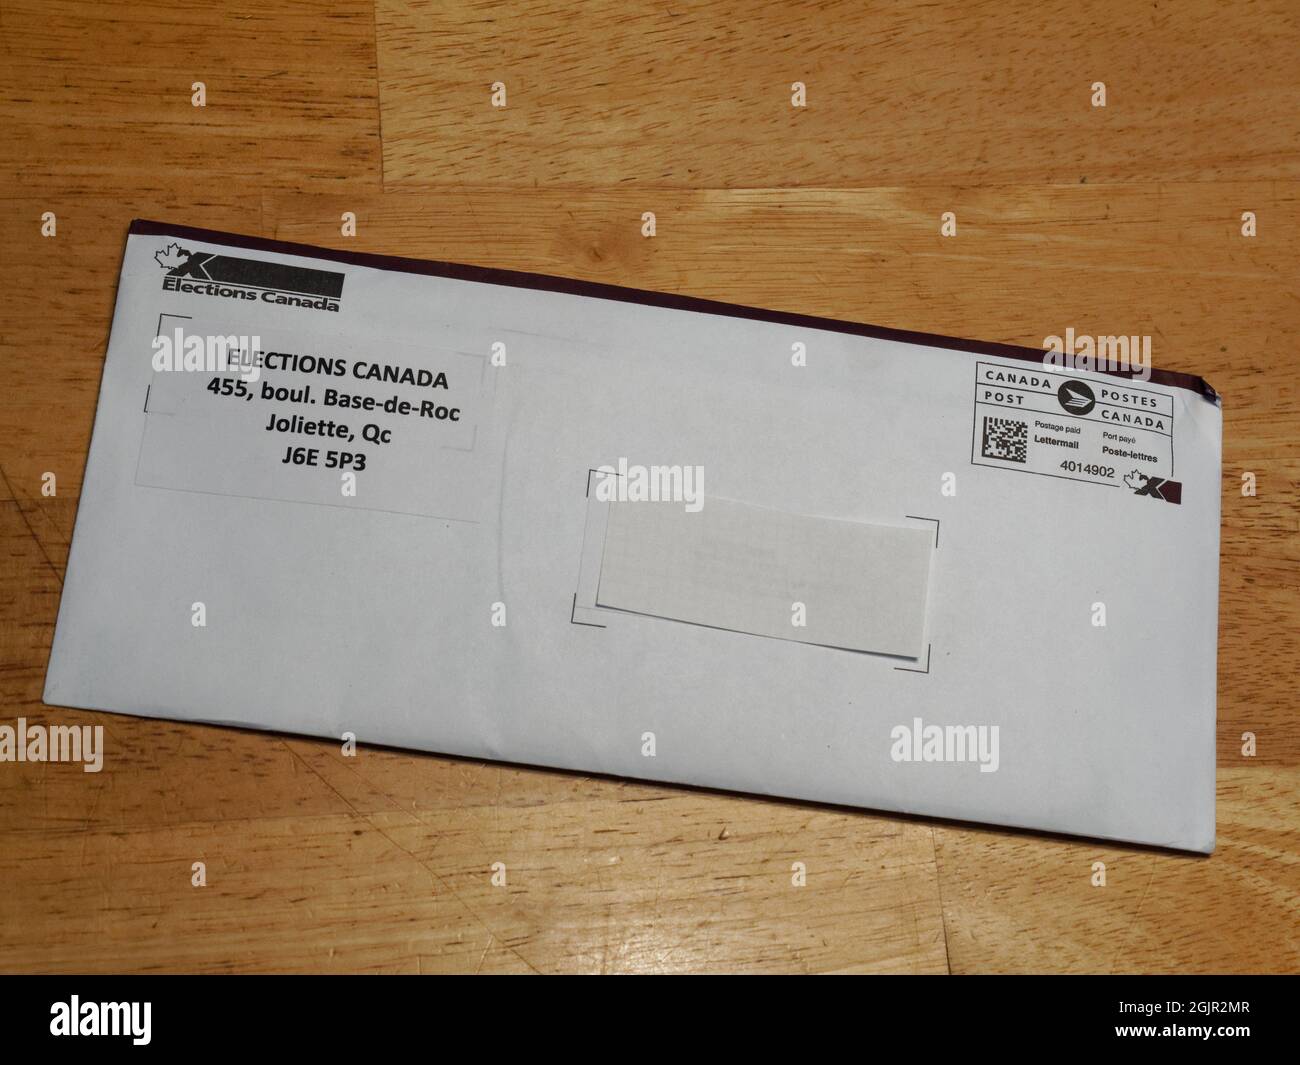 Elections Canada vote by mail return envelope. Quebec,Canada. Stock Photo